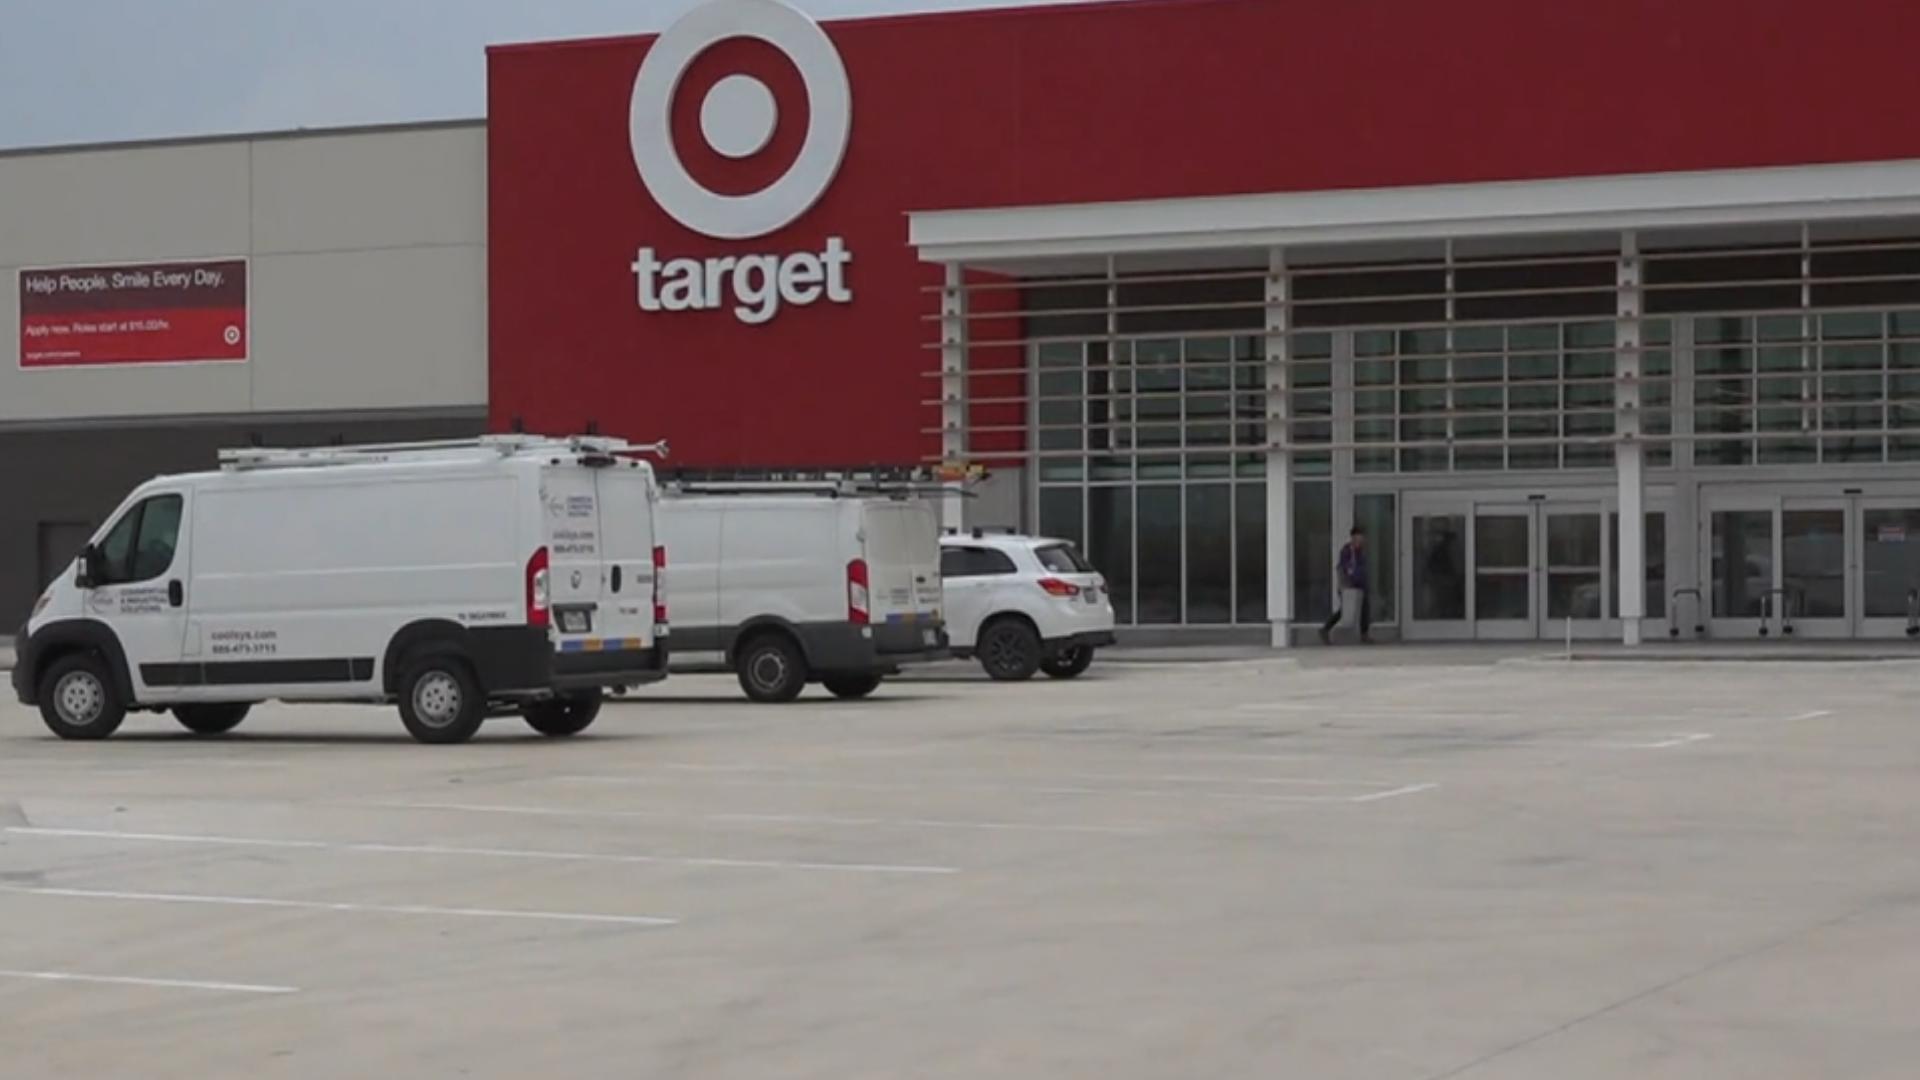 The new Target is set to open on August 18.